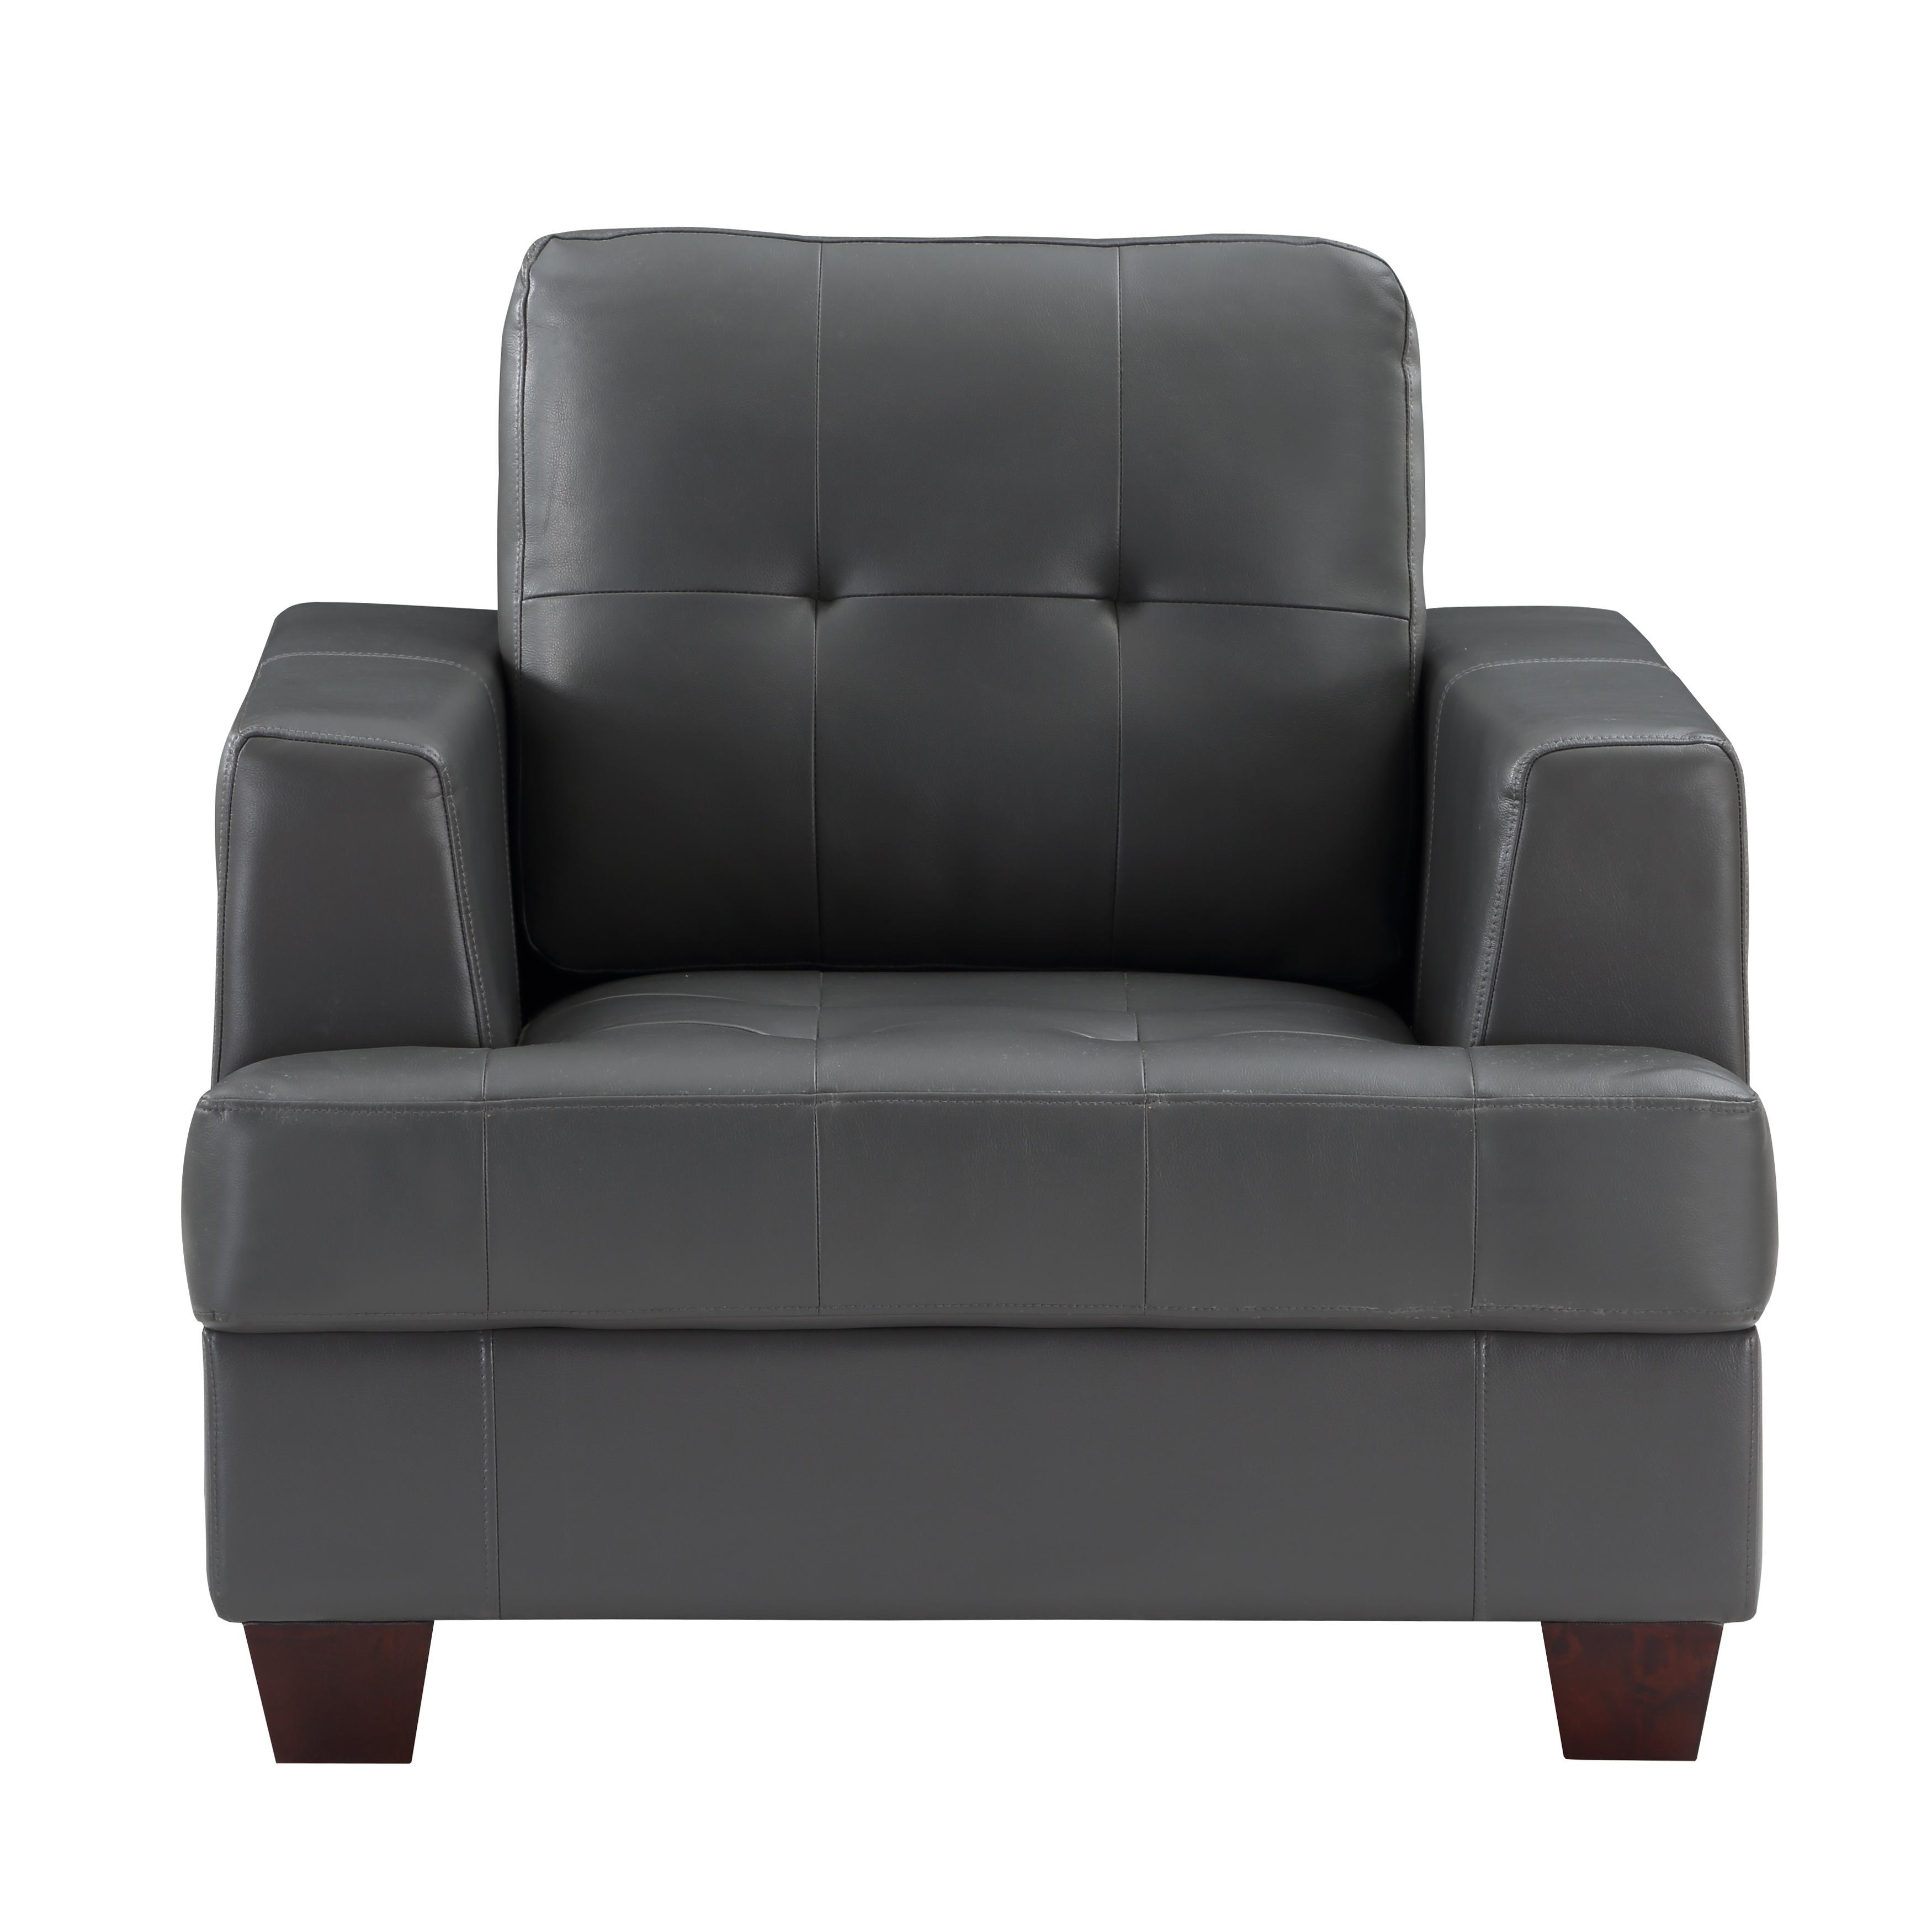 Modern Arm Chair 9309GY-1 Hinsall 9309GY-1 in Gray Faux Leather